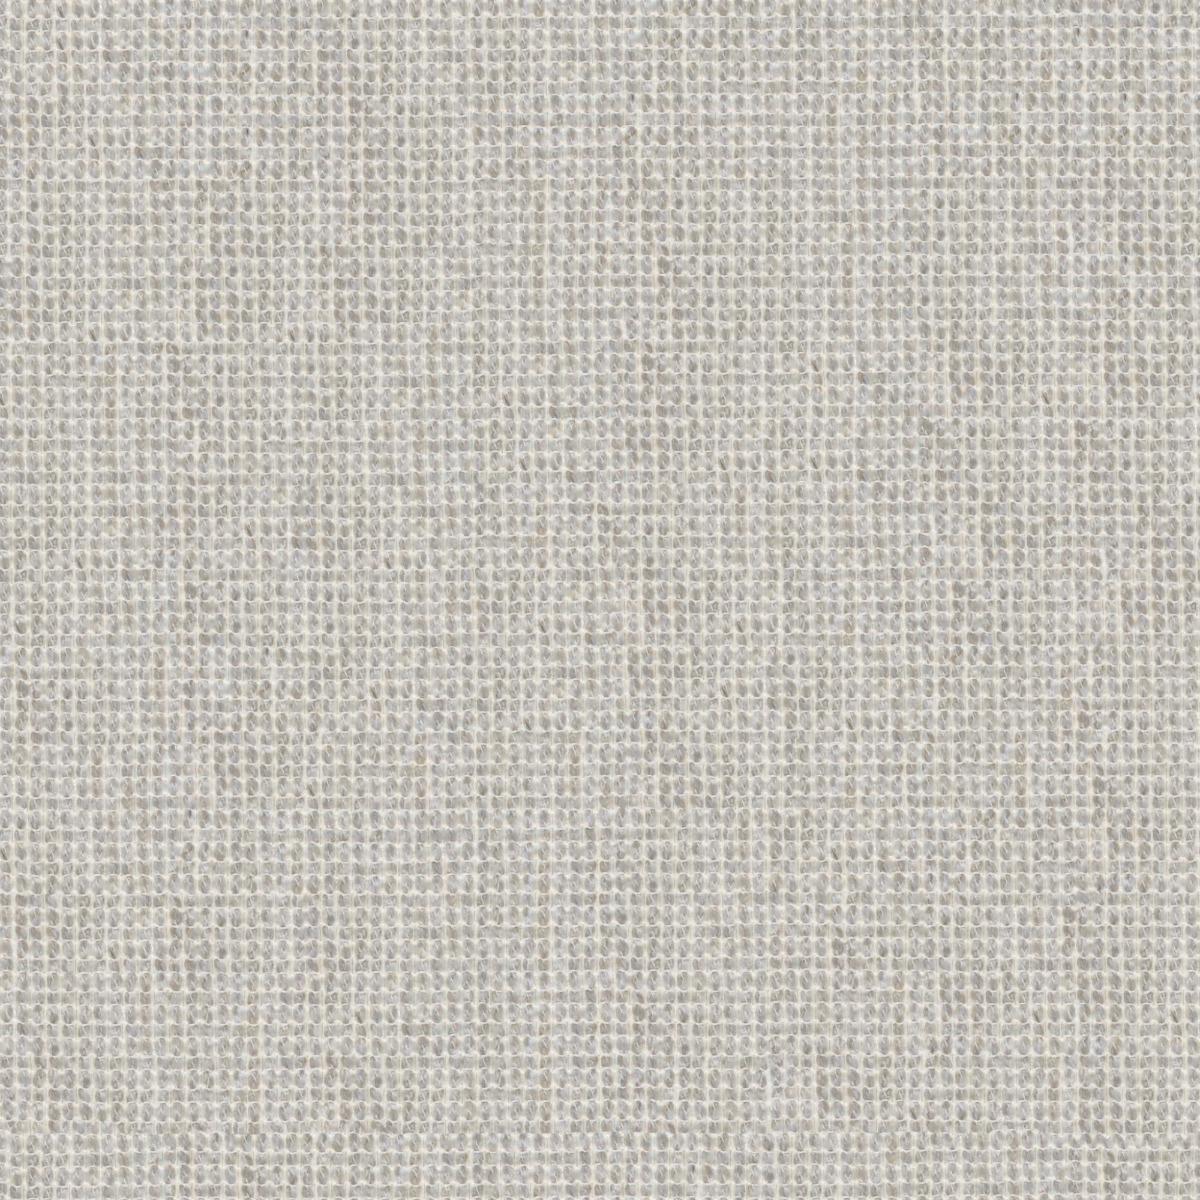 A seamless fabric texture with plain grey sheer units arranged in a None pattern